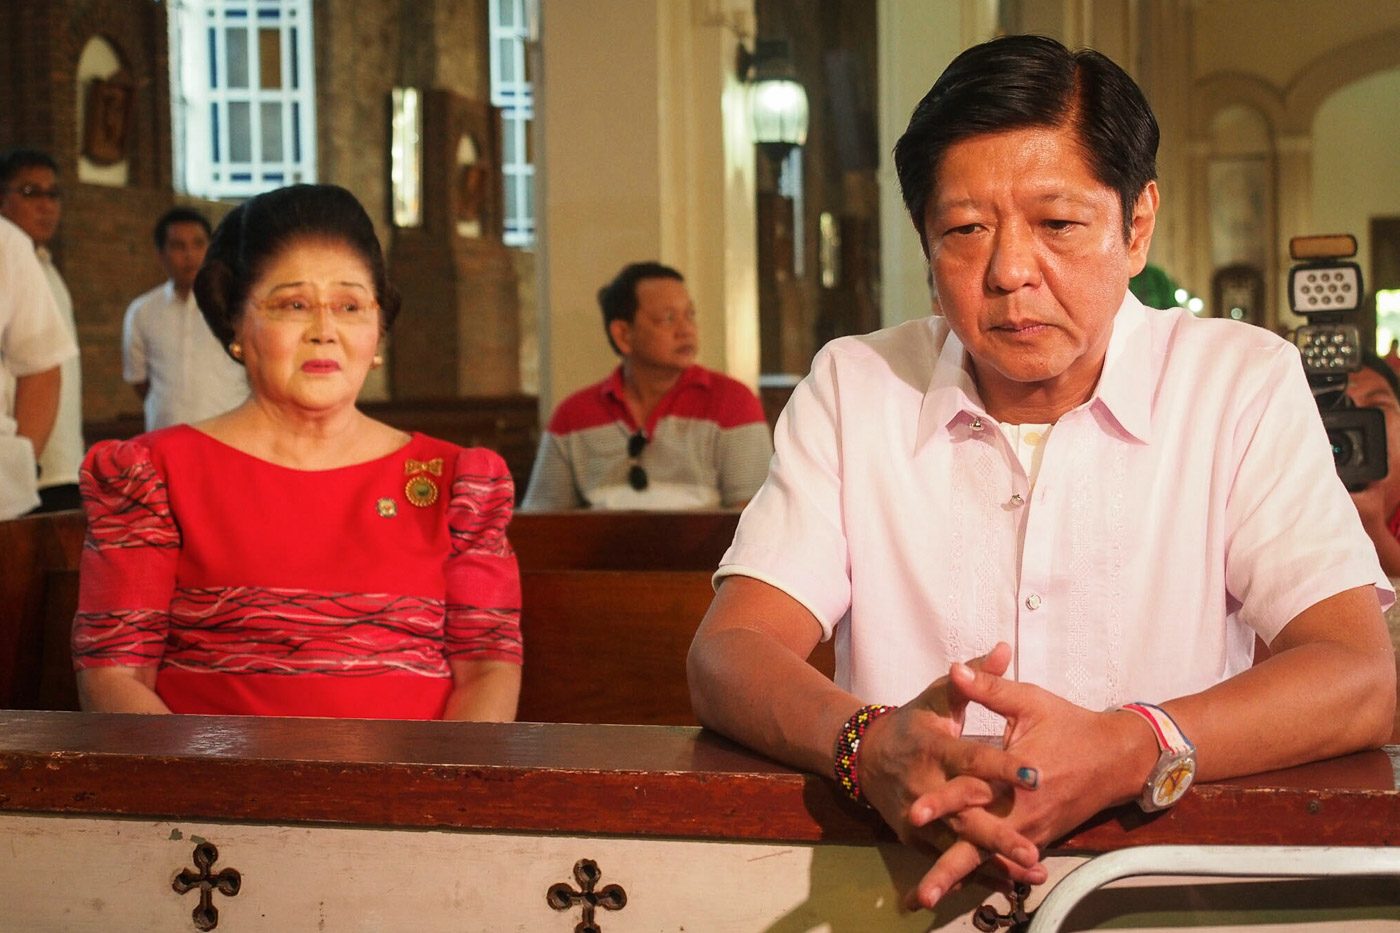 Vice Presidential candidate Senator Bongbong Marcos is joined by his mother Imelda in praying before casting his vote in Batac, Ilocos Norte. Photo by Jasmin Dulay/Rappler   